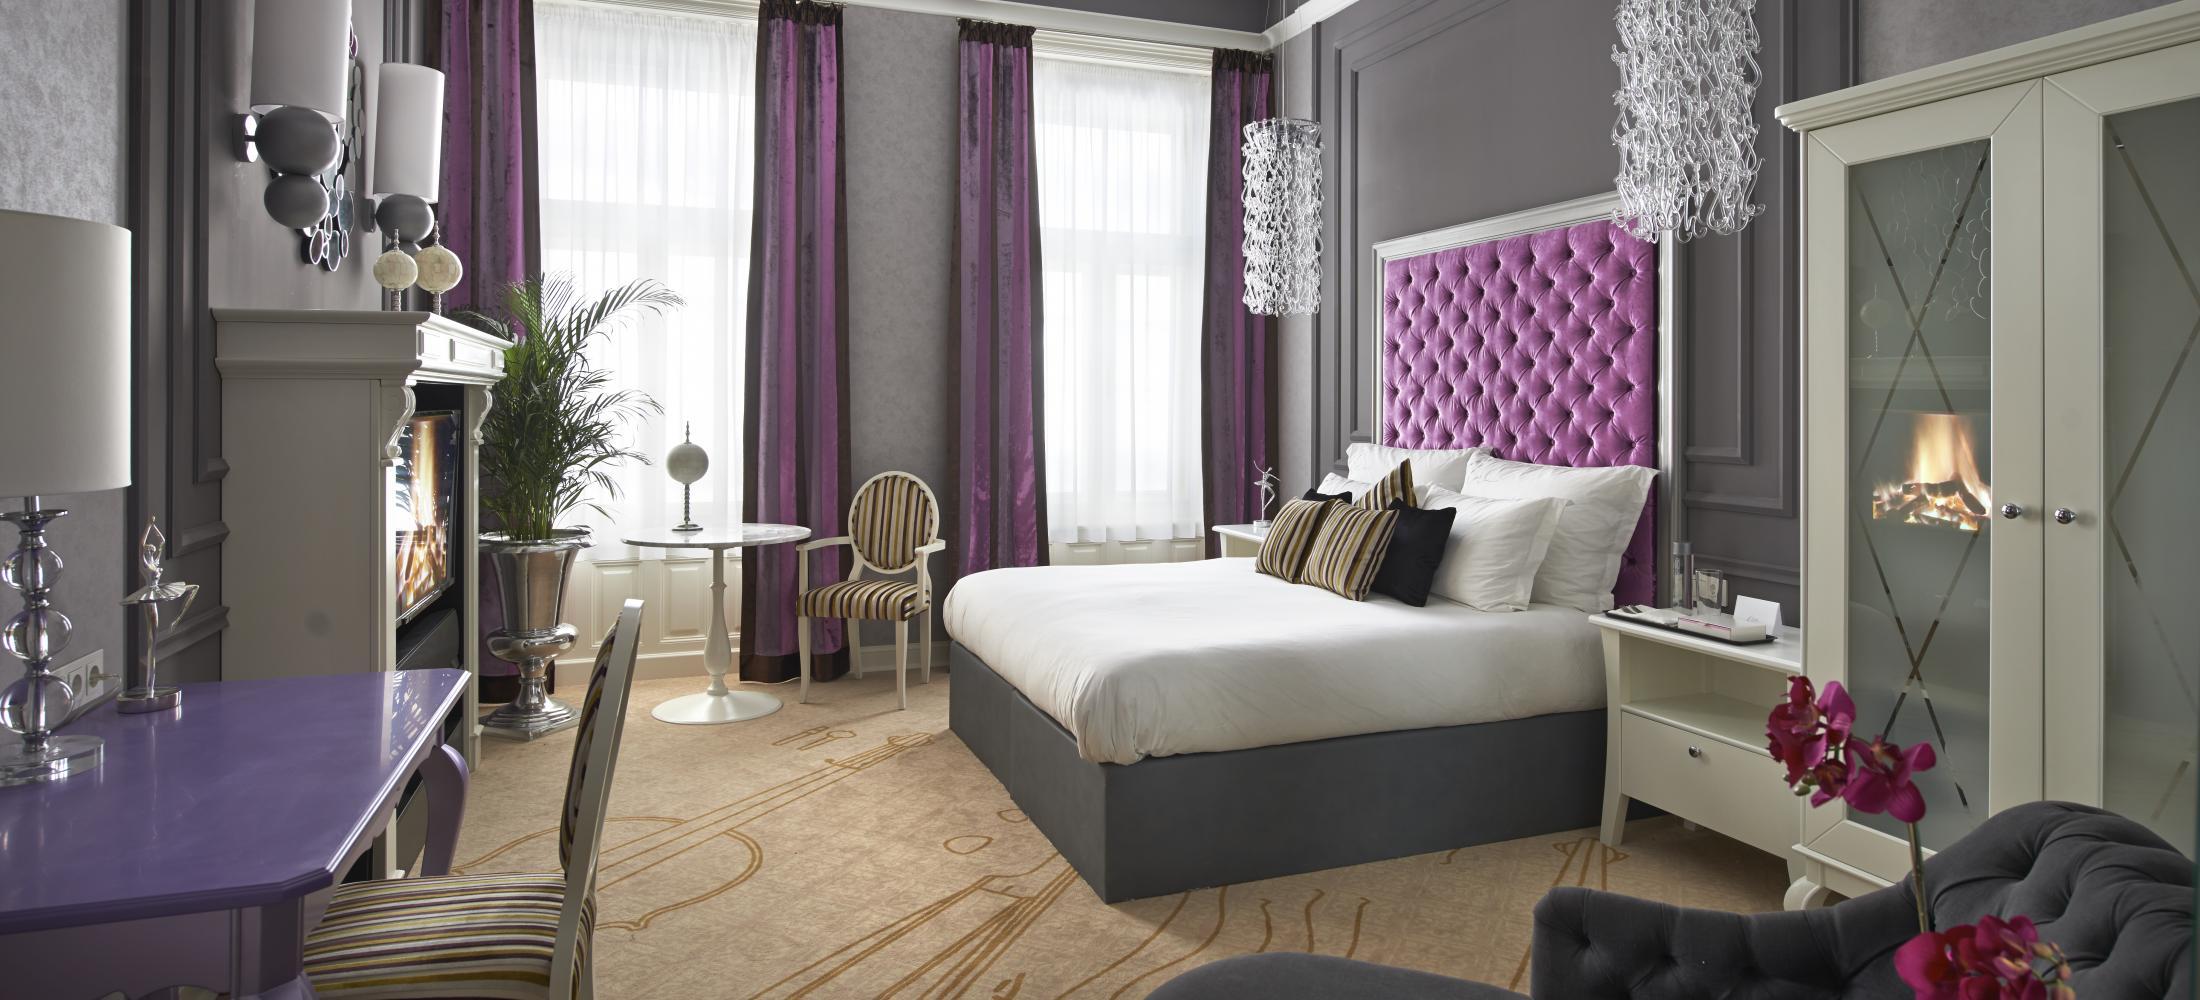 The Aria Hotel Budapest is a luxury boutique hotel with an exquisite design inspired by music.